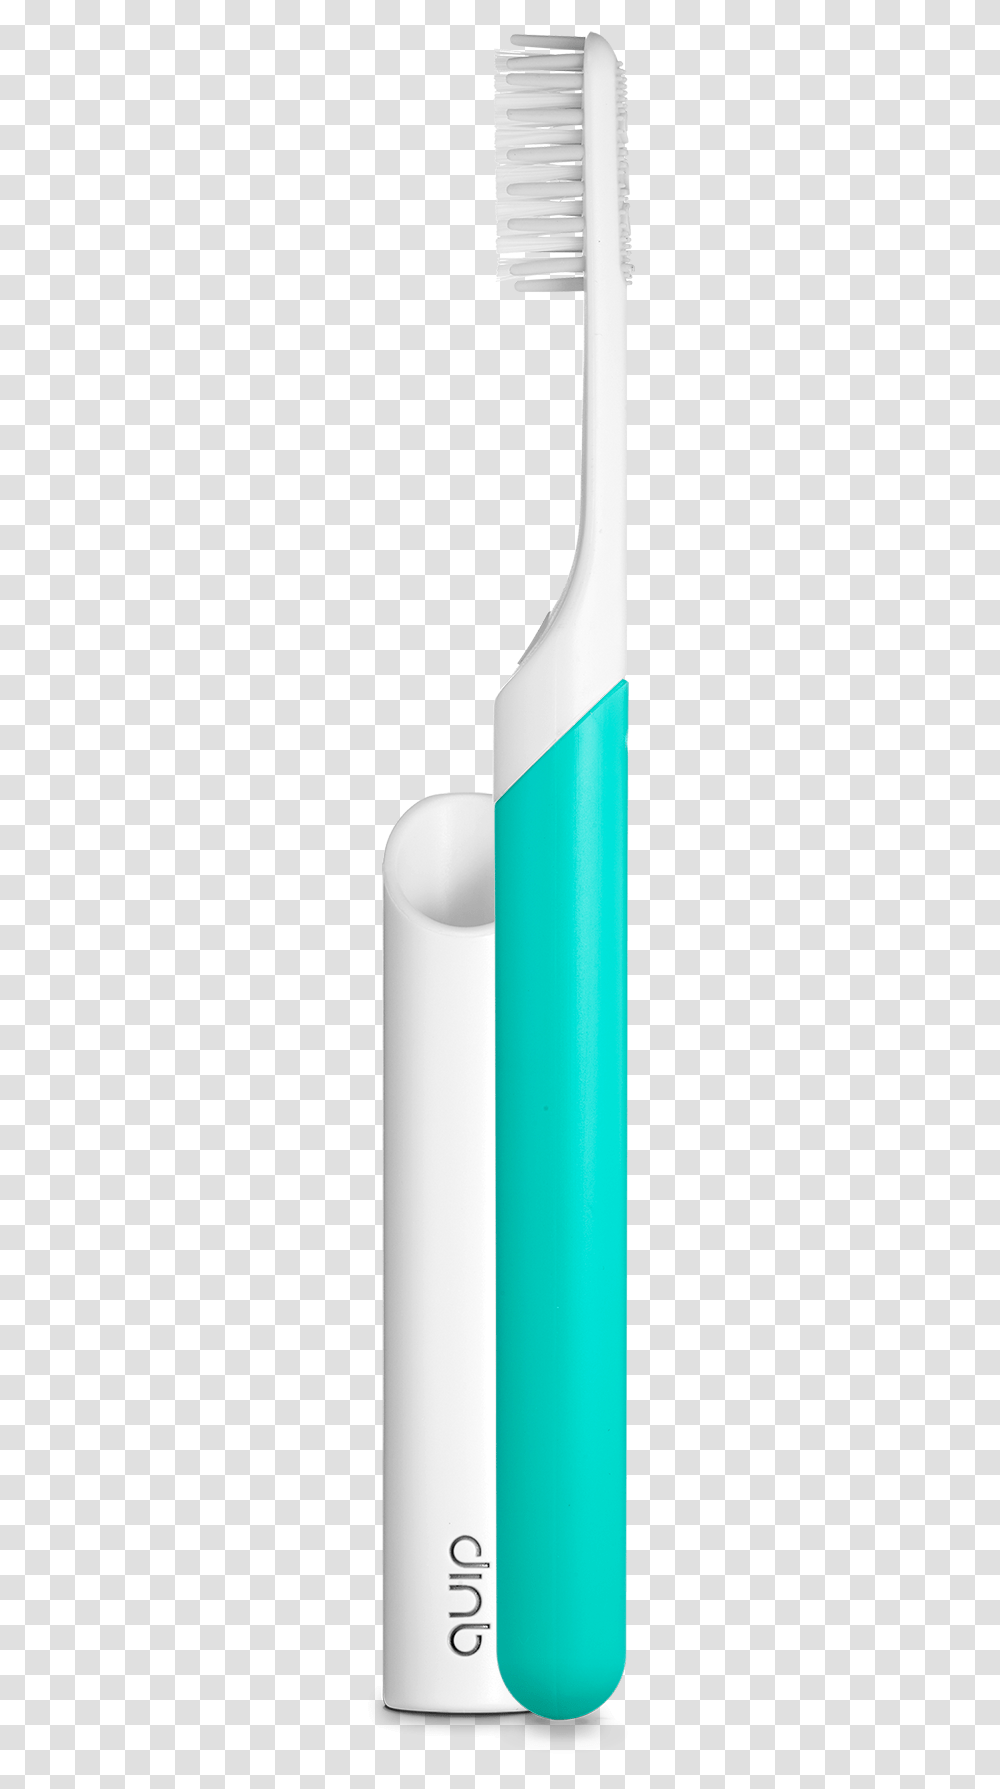 Toothbrush Quip Electric Toothbrush, Cylinder, Can, Tin, Spray Can Transparent Png